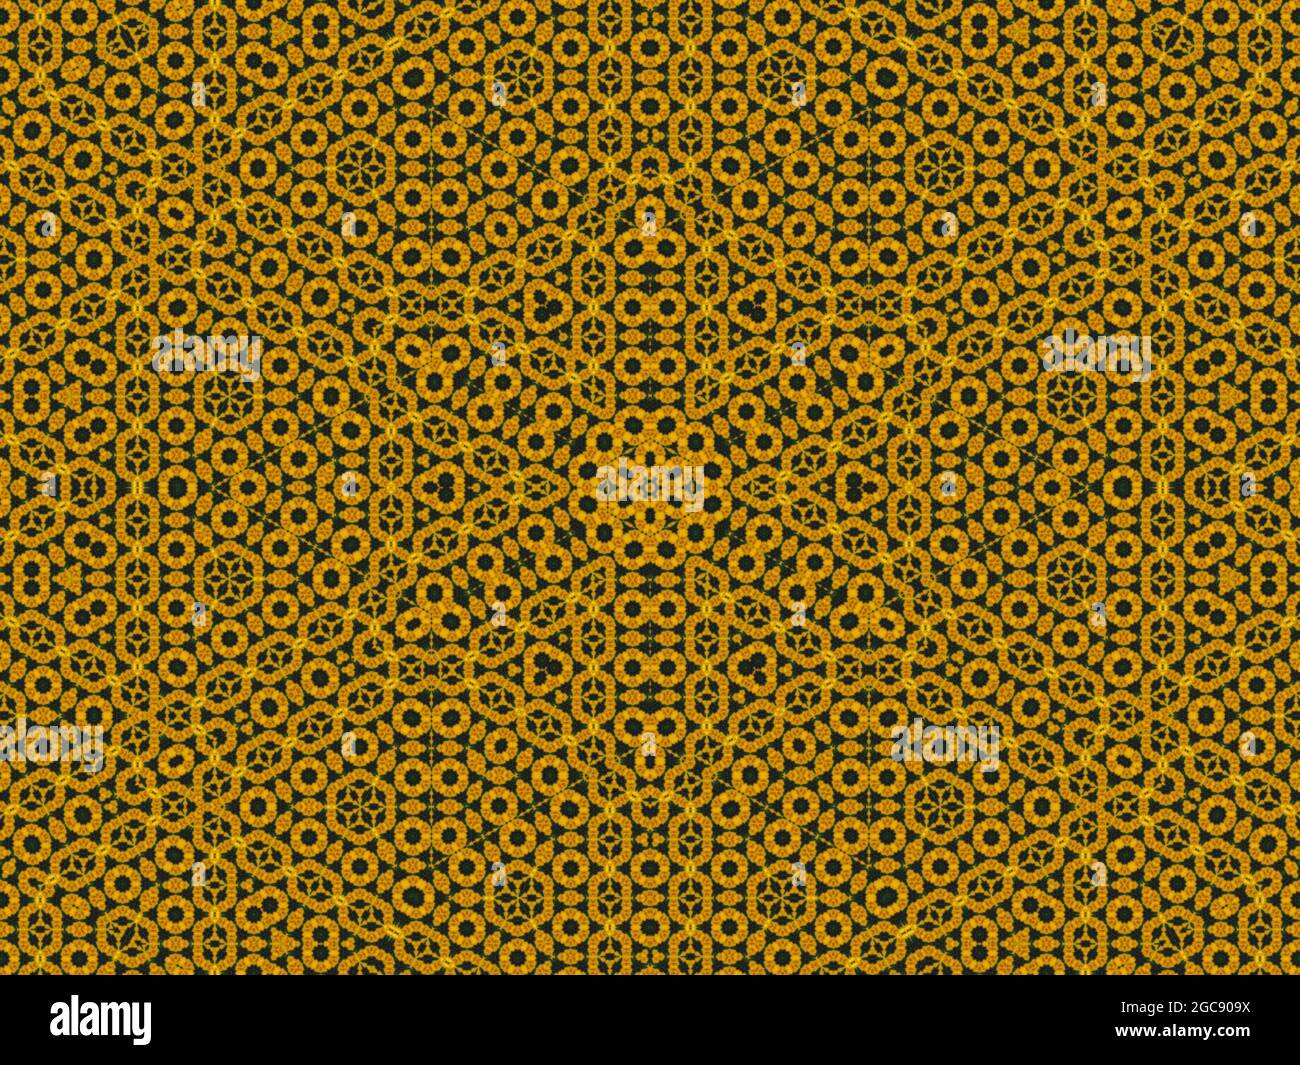 Honeycomb and bee abstract digital pattern. Honeycomb kaleidoscope print for interior decor. Islamic style geometric design patterns for tiles. Stock Photo